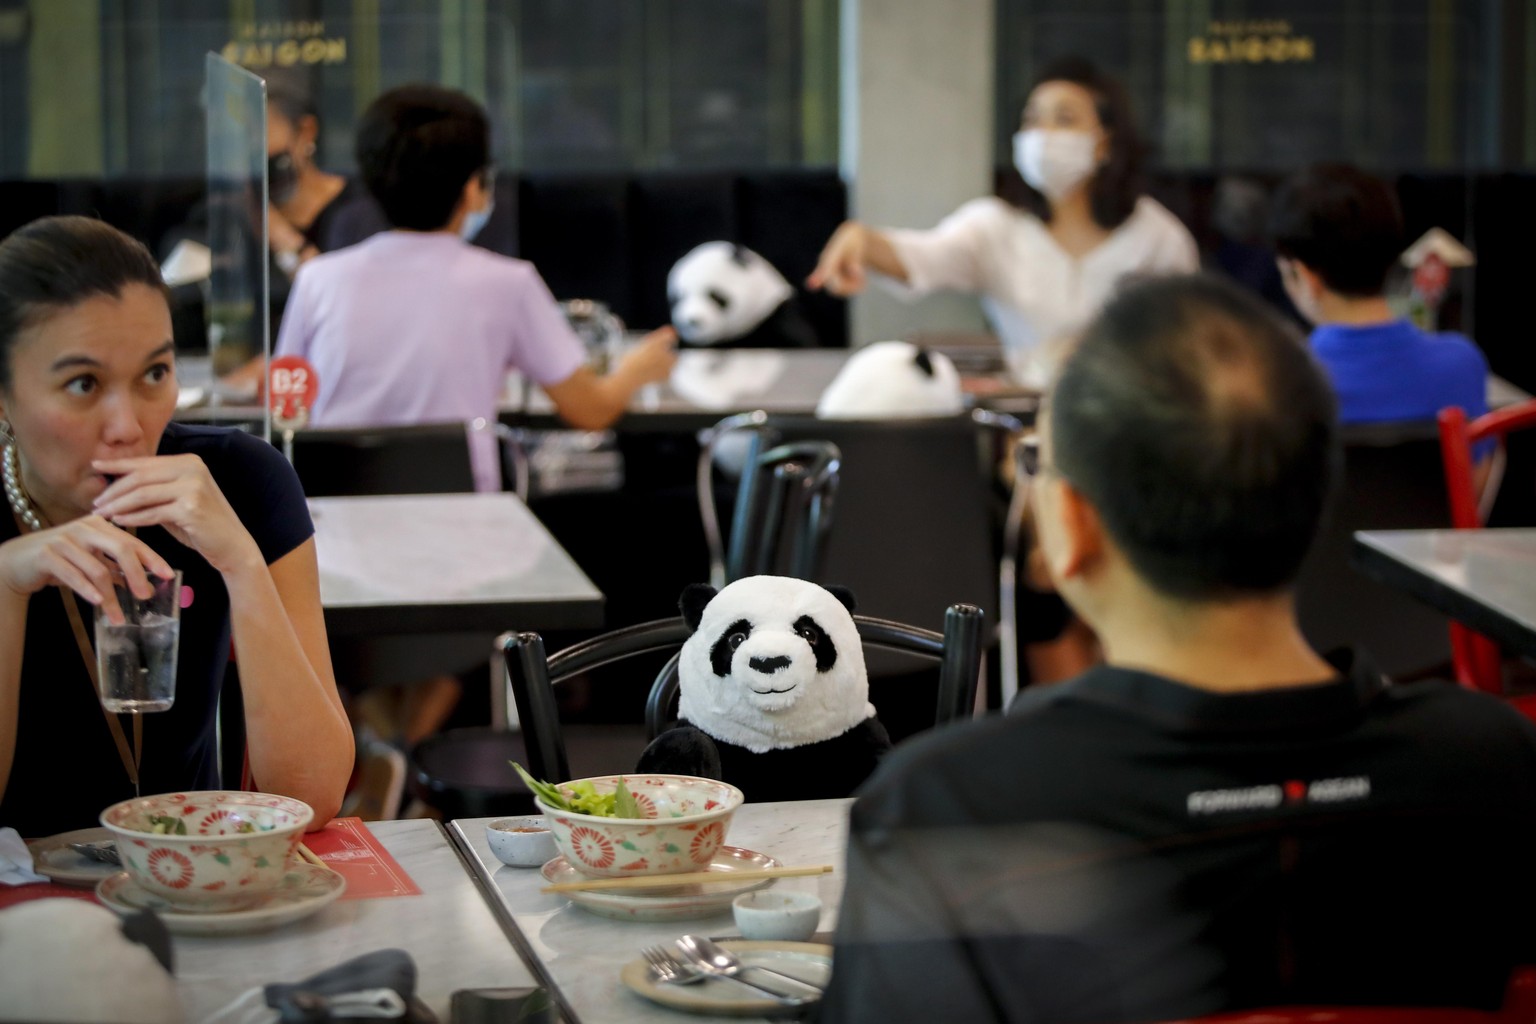 epa08431222 A stuffed panda is placed on a chair as a means to enforce social distancing at a restaurant in Bangkok, Thailand, 19 May 2020. Thailand has relaxed stringent lockdown measures allowing ce ...